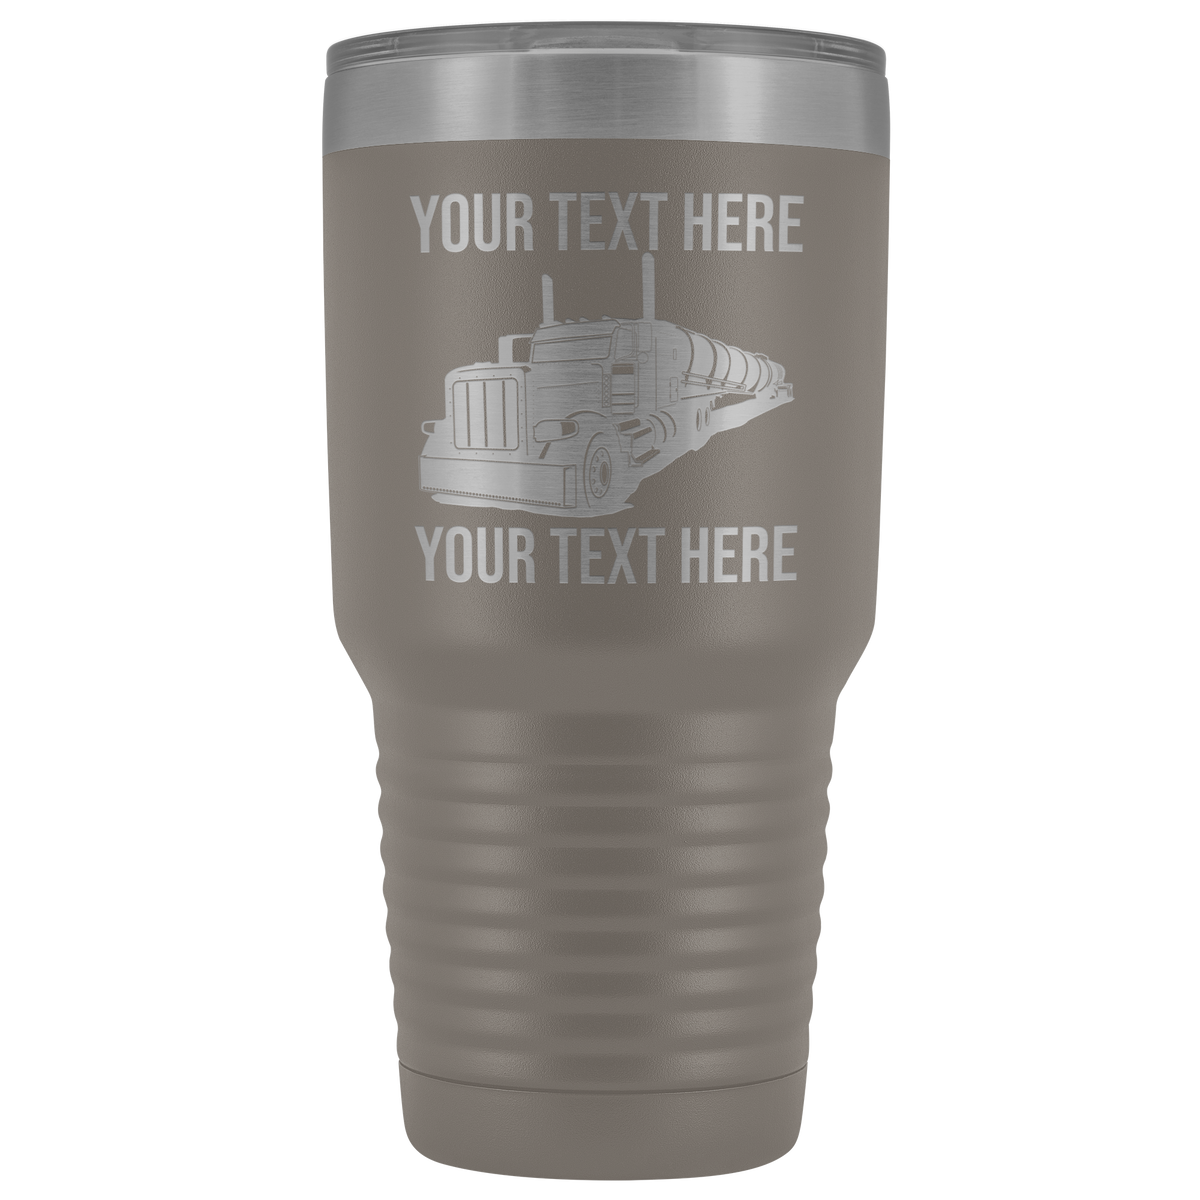 Pete Conical Tanker Your Text Here 30oz. Tumbler Free Shipping